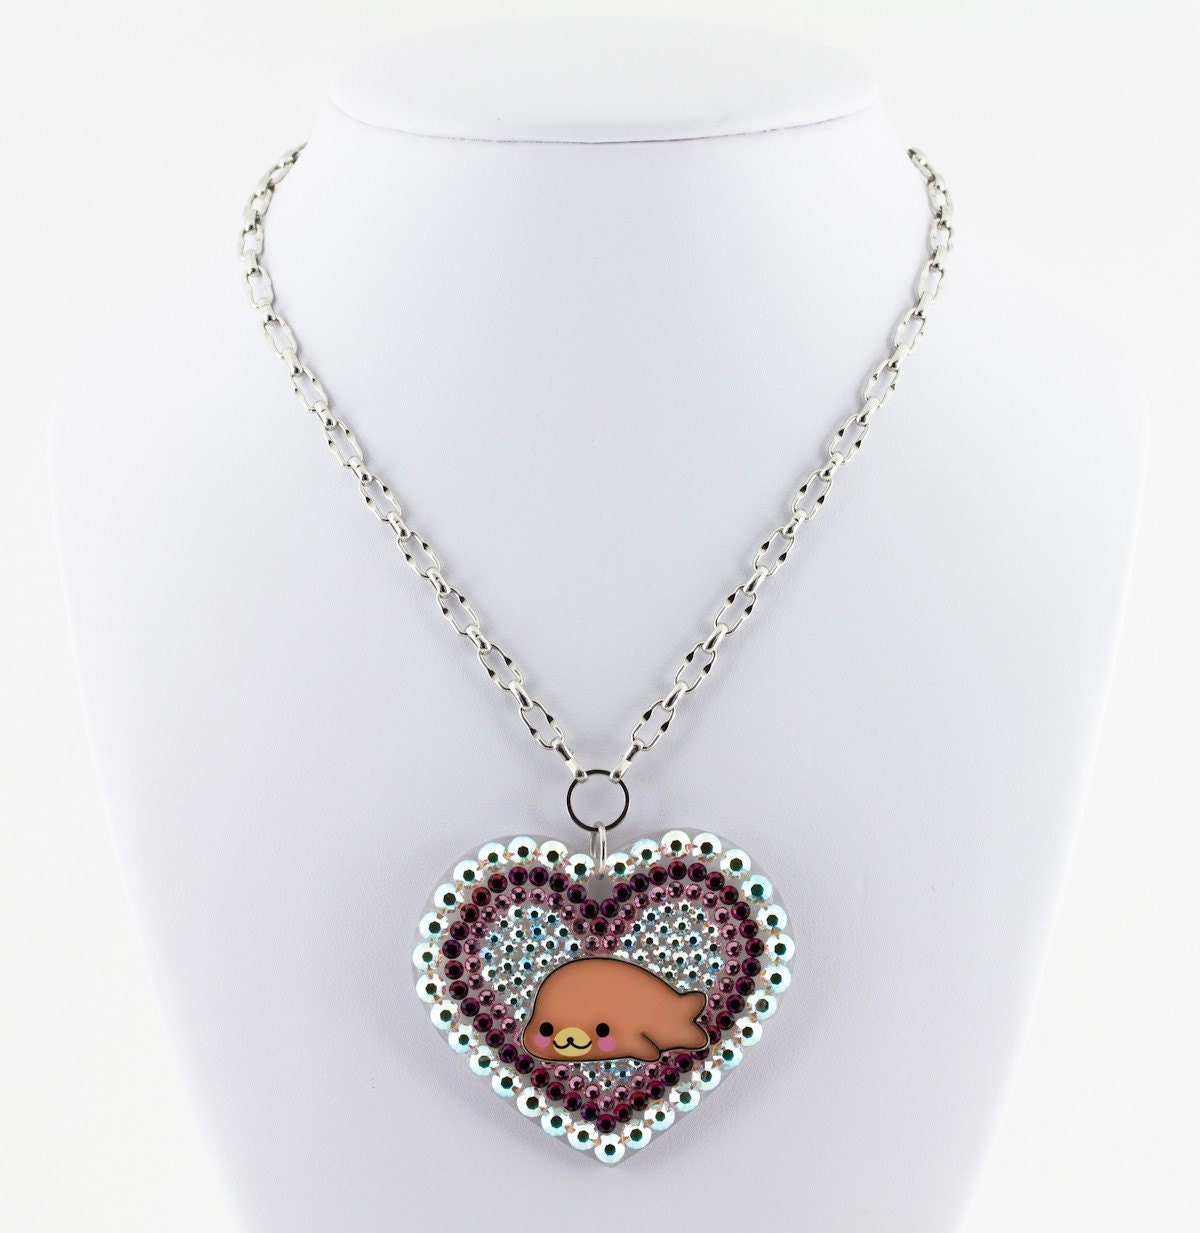 Huge Bling Mamegoma Happy Seal Swarovski Crystal Heart Pendant on funky rhodium plated chain cute japanese lolita style/inspired